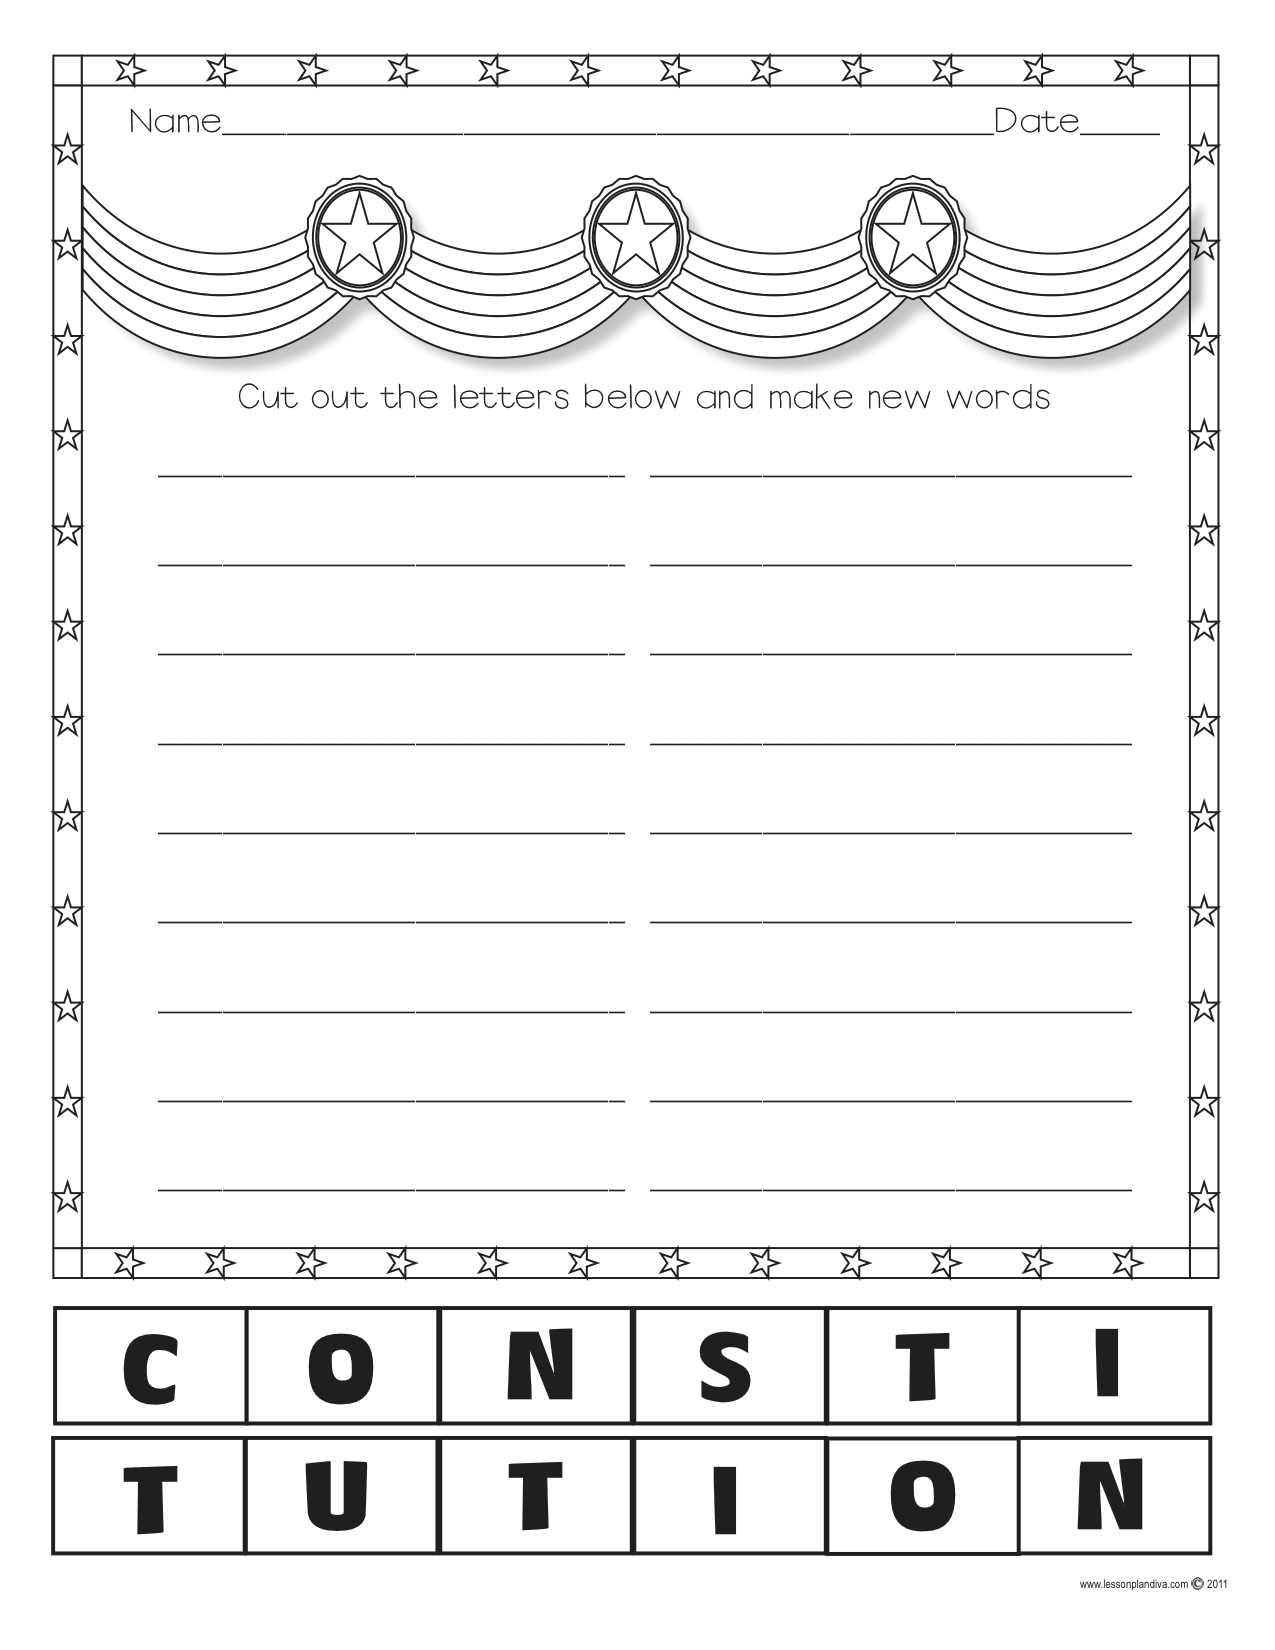 14-best-images-of-constitution-preamble-worksheet-key-guided-reading